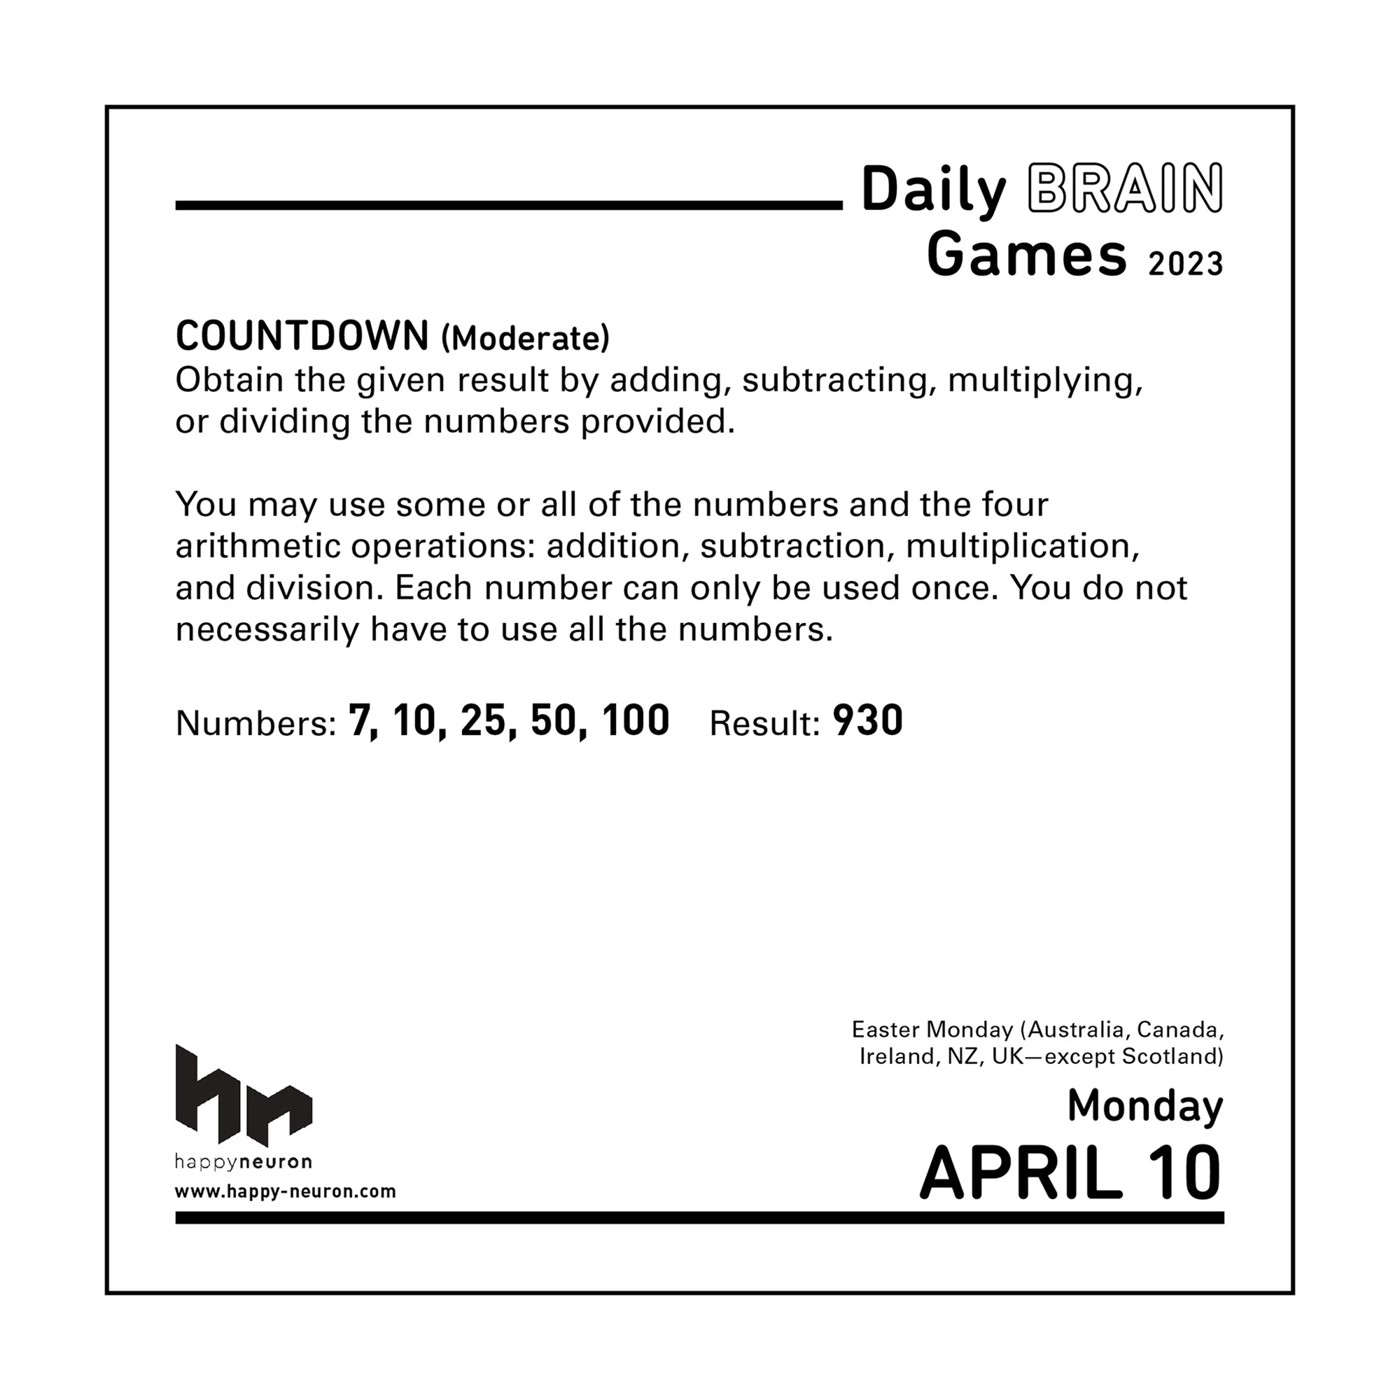 Daily Brain Games 2023 Day-to-Day Calendar: HAPPYneuron